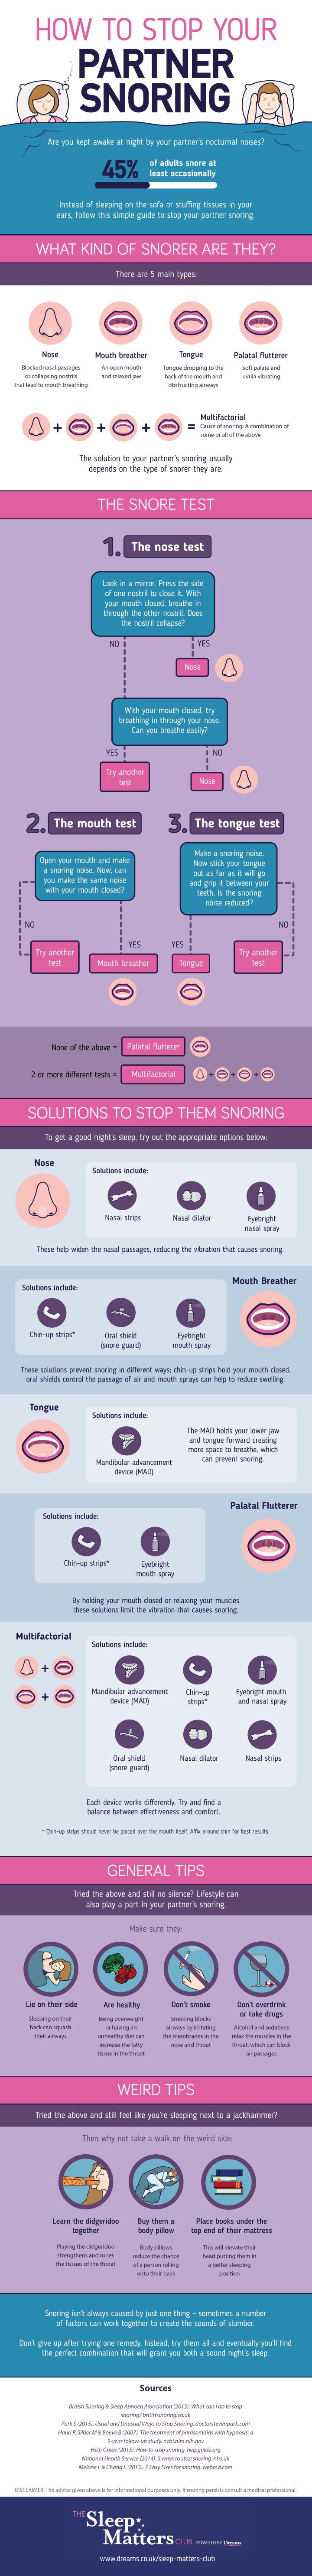 How-to-stop-your-partner-snoring-infographic